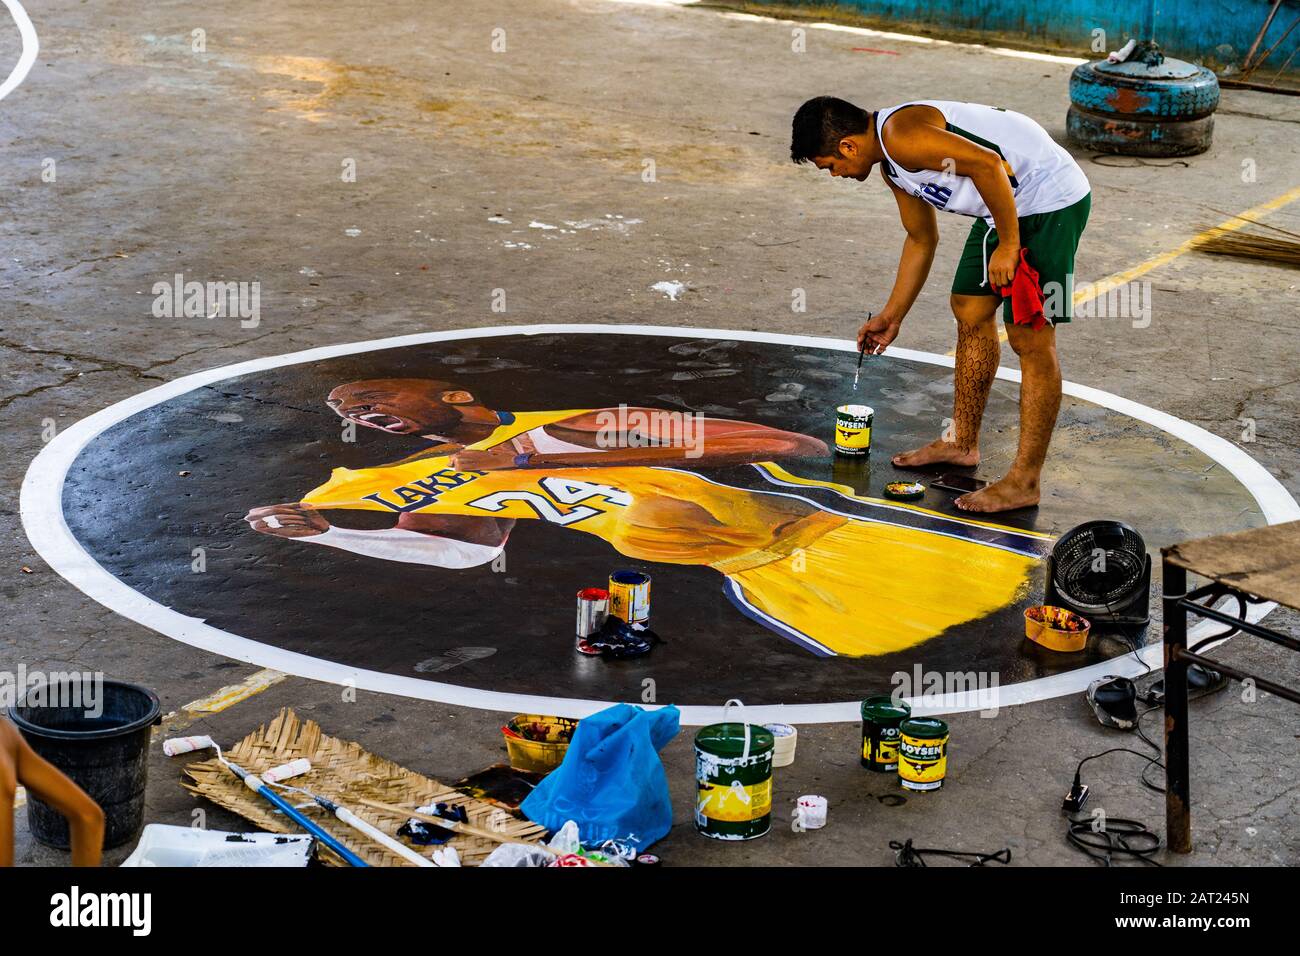 Cebu City, Philippines. 30th Jan, 2020. Filipino artist Laurence Yuyen Ravina painting a mural of his basketball hero Kobe Bryant on the local community court.Basketball loving kids in the area chipped in the money to buy the paints. With Basketball being the most popular sport in the Philippines many Filipinos have been coming to terms with the sad passing of the Basketball legend. Credit: imagegallery2/Alamy Live News Stock Photo